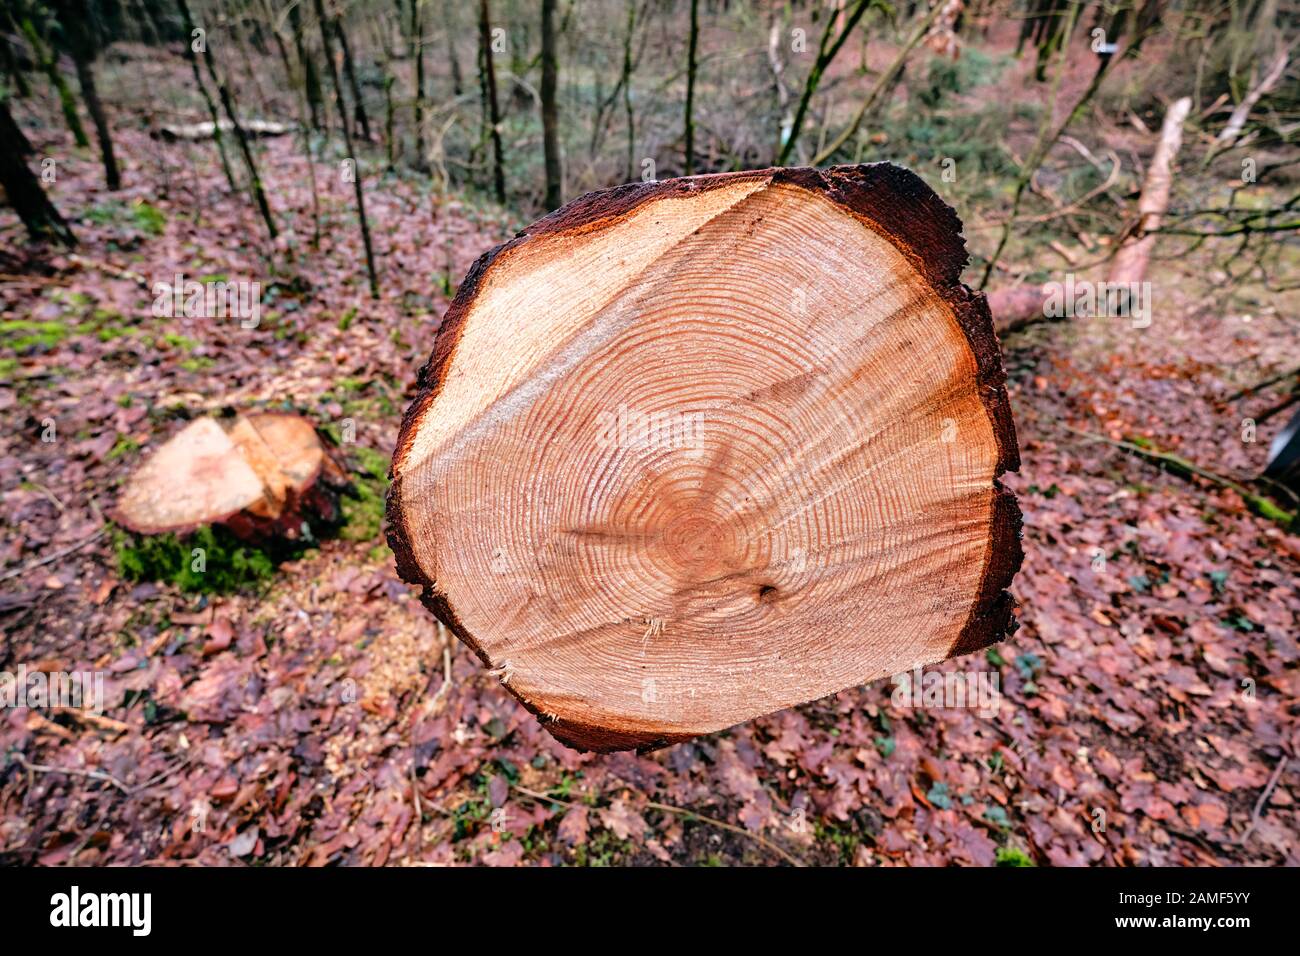 View at the annual rings of a freshly felled tree in the winter forest. Seen in Bavaria, Germany in January. Stock Photo